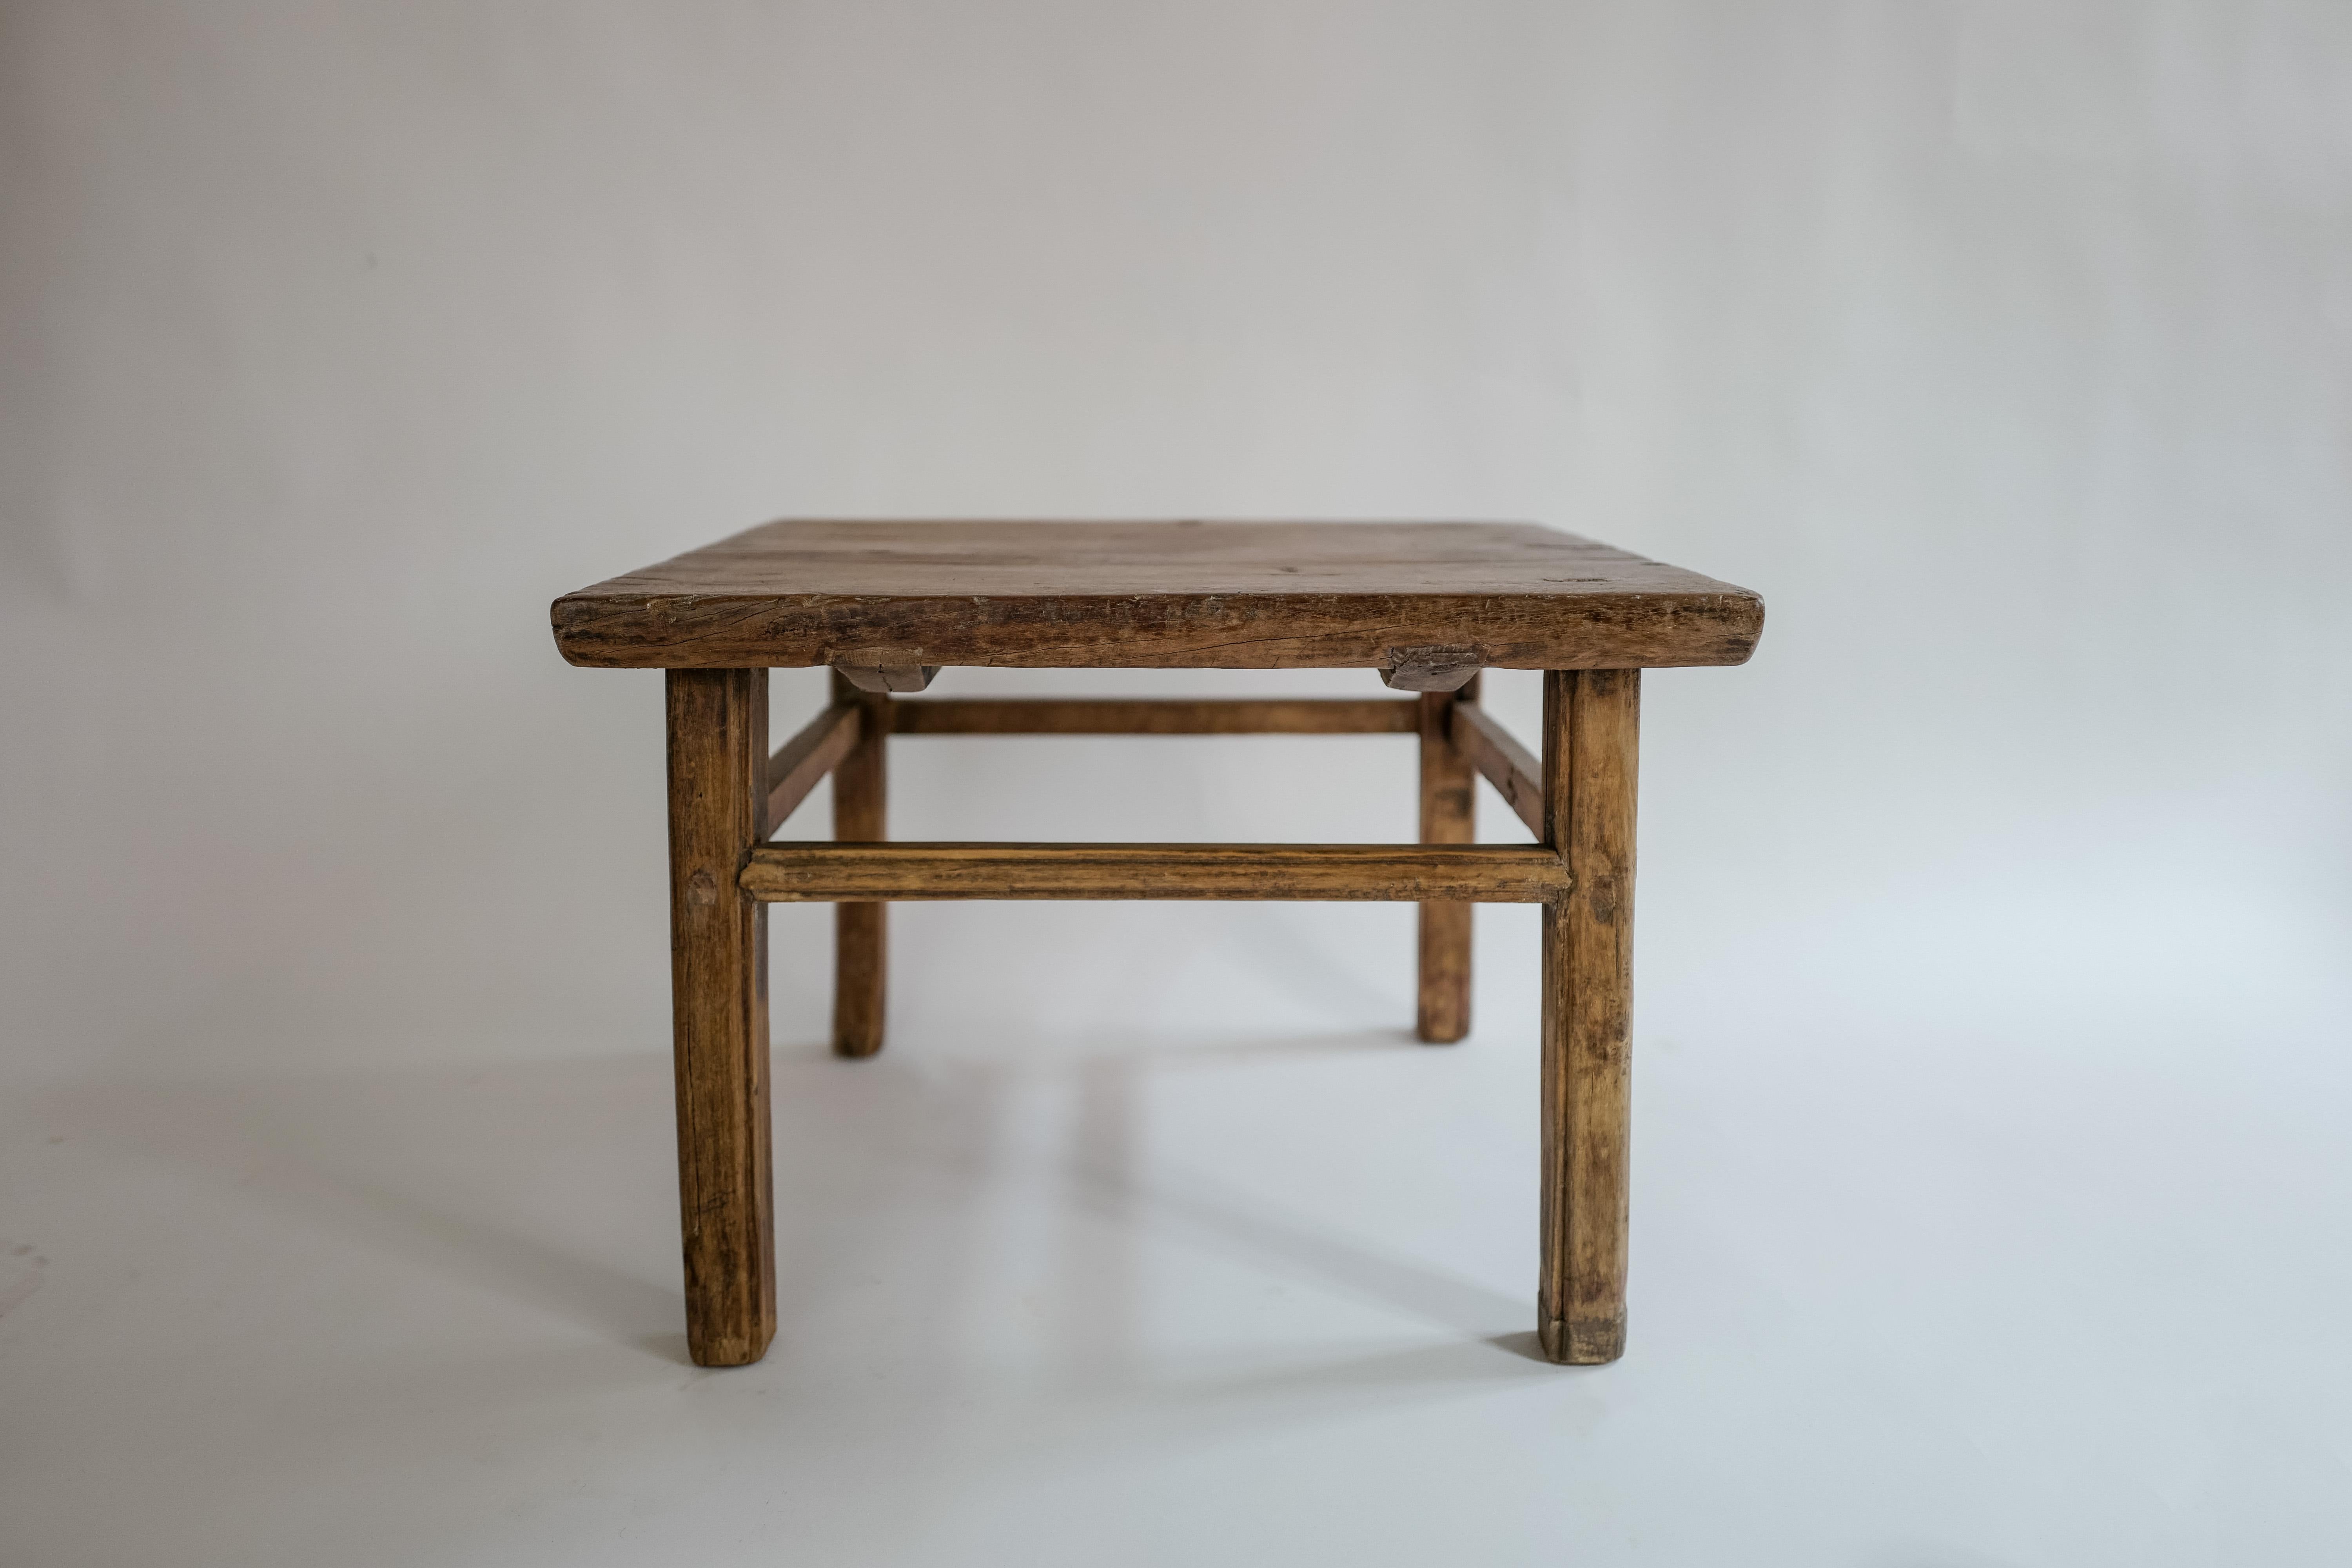 Hand-Crafted Elm Wood Side Table Handcrafted in China, circa Early 20th Century For Sale